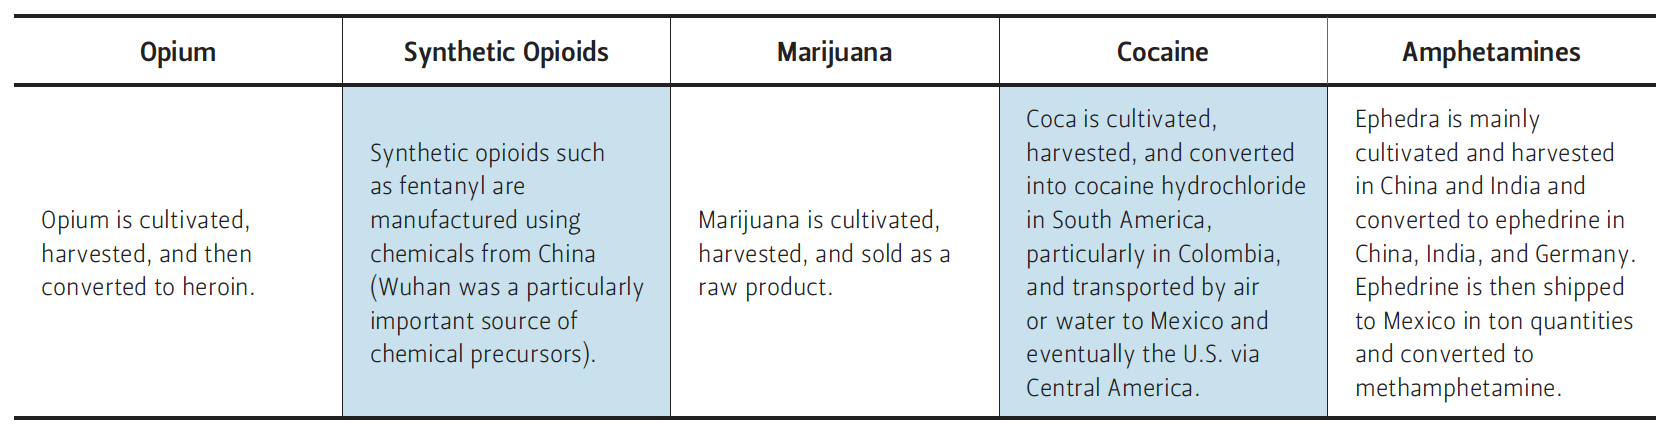 This table describes the drugs produced or transported through Mexico impacted by effects of COVID-19.